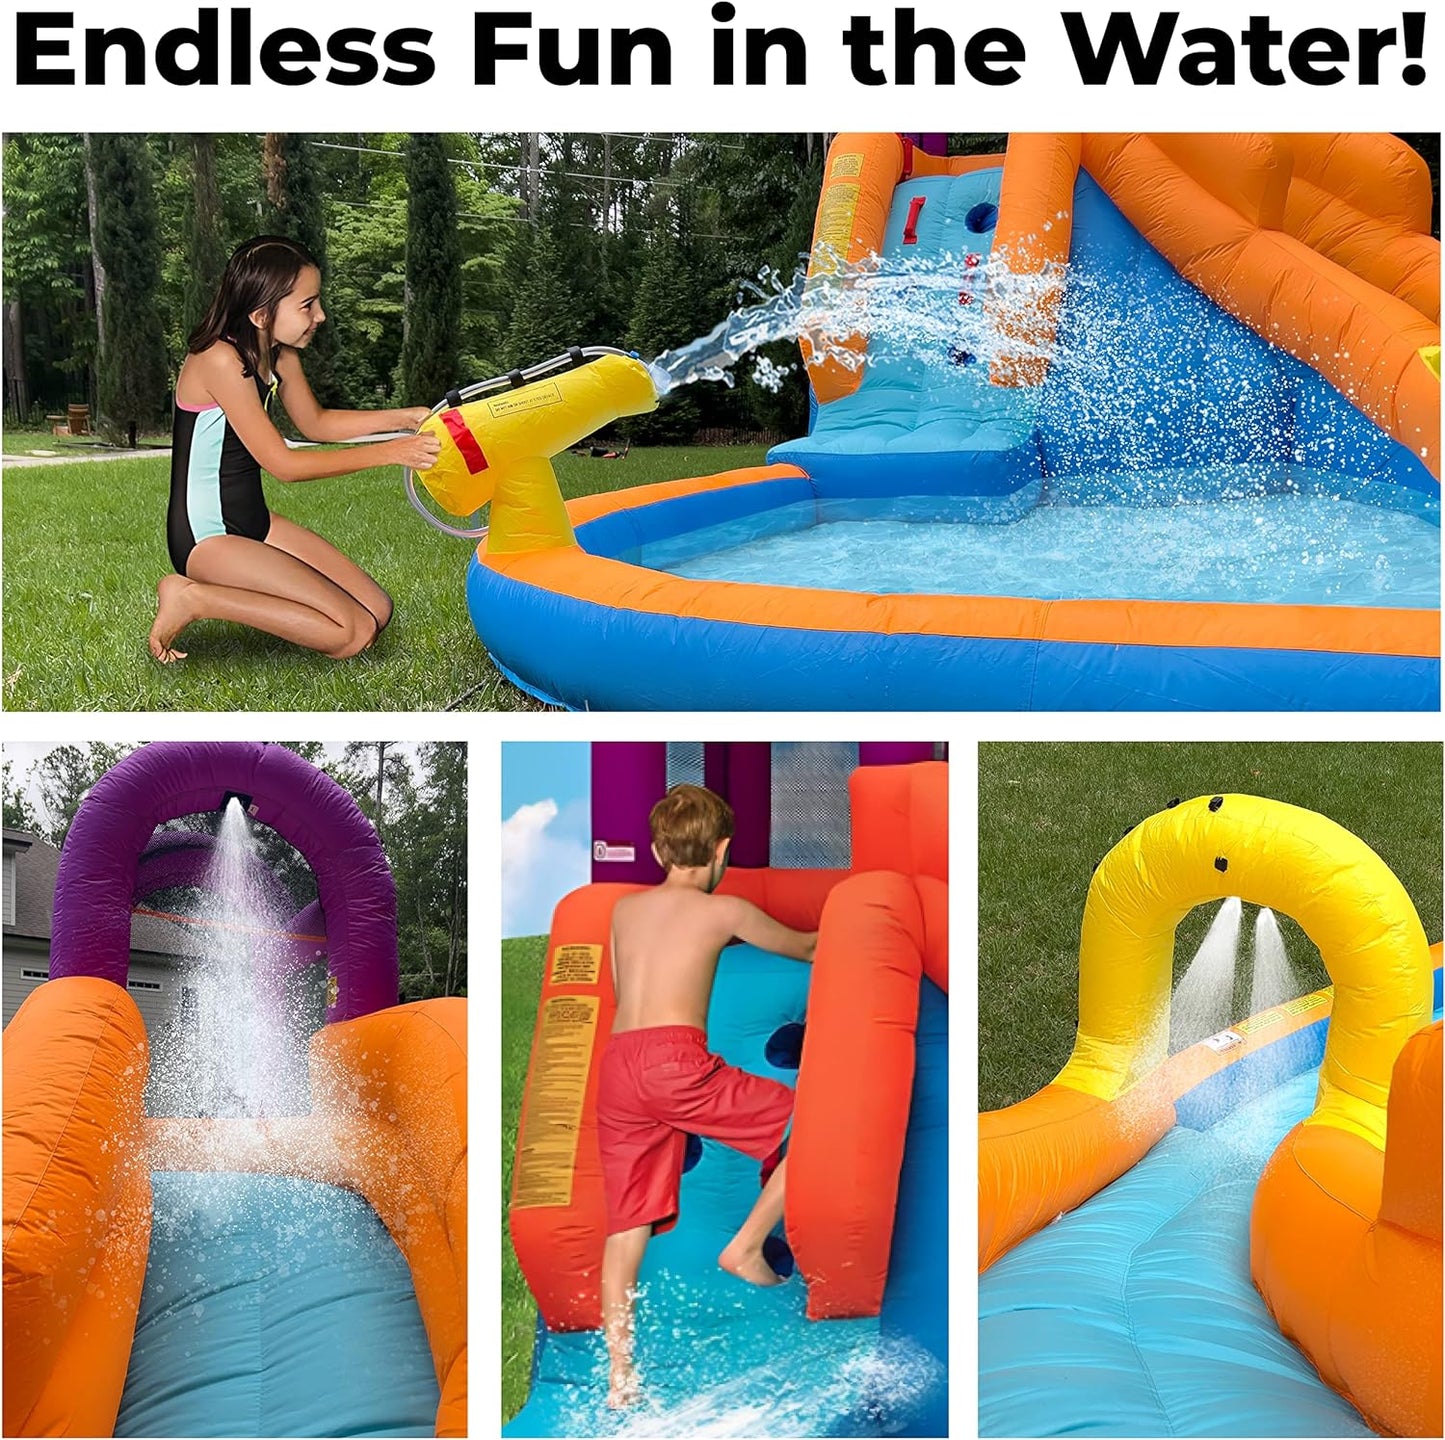 Mega Tornado Twist Inflatable Water Slide for Kids - Water Park with Slides, Climbing Wall, Water Cannon and Splash Pool - Ages 5 and up - with Blower